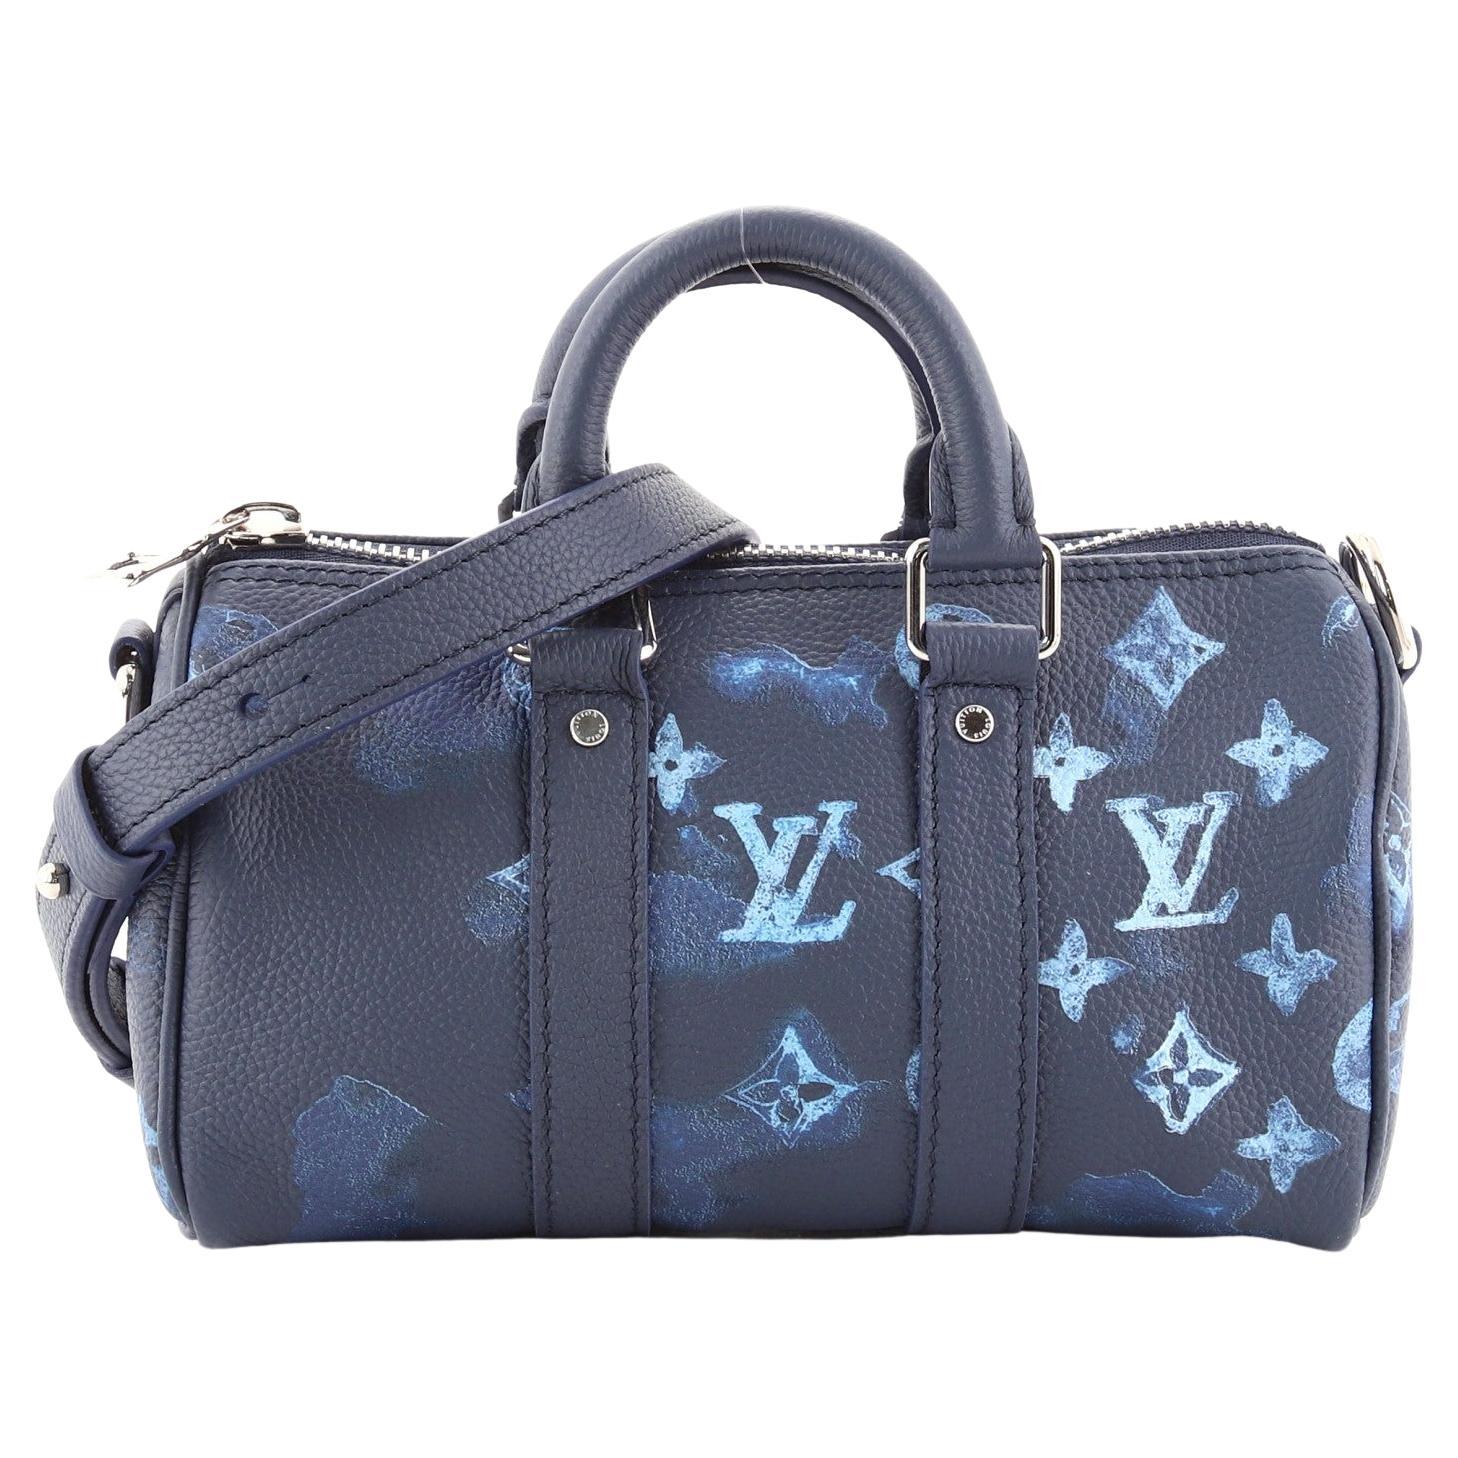 Louis Vuitton Keepall Bandouliere 40 Watercolor Ink Blue Weekend Travel Bag